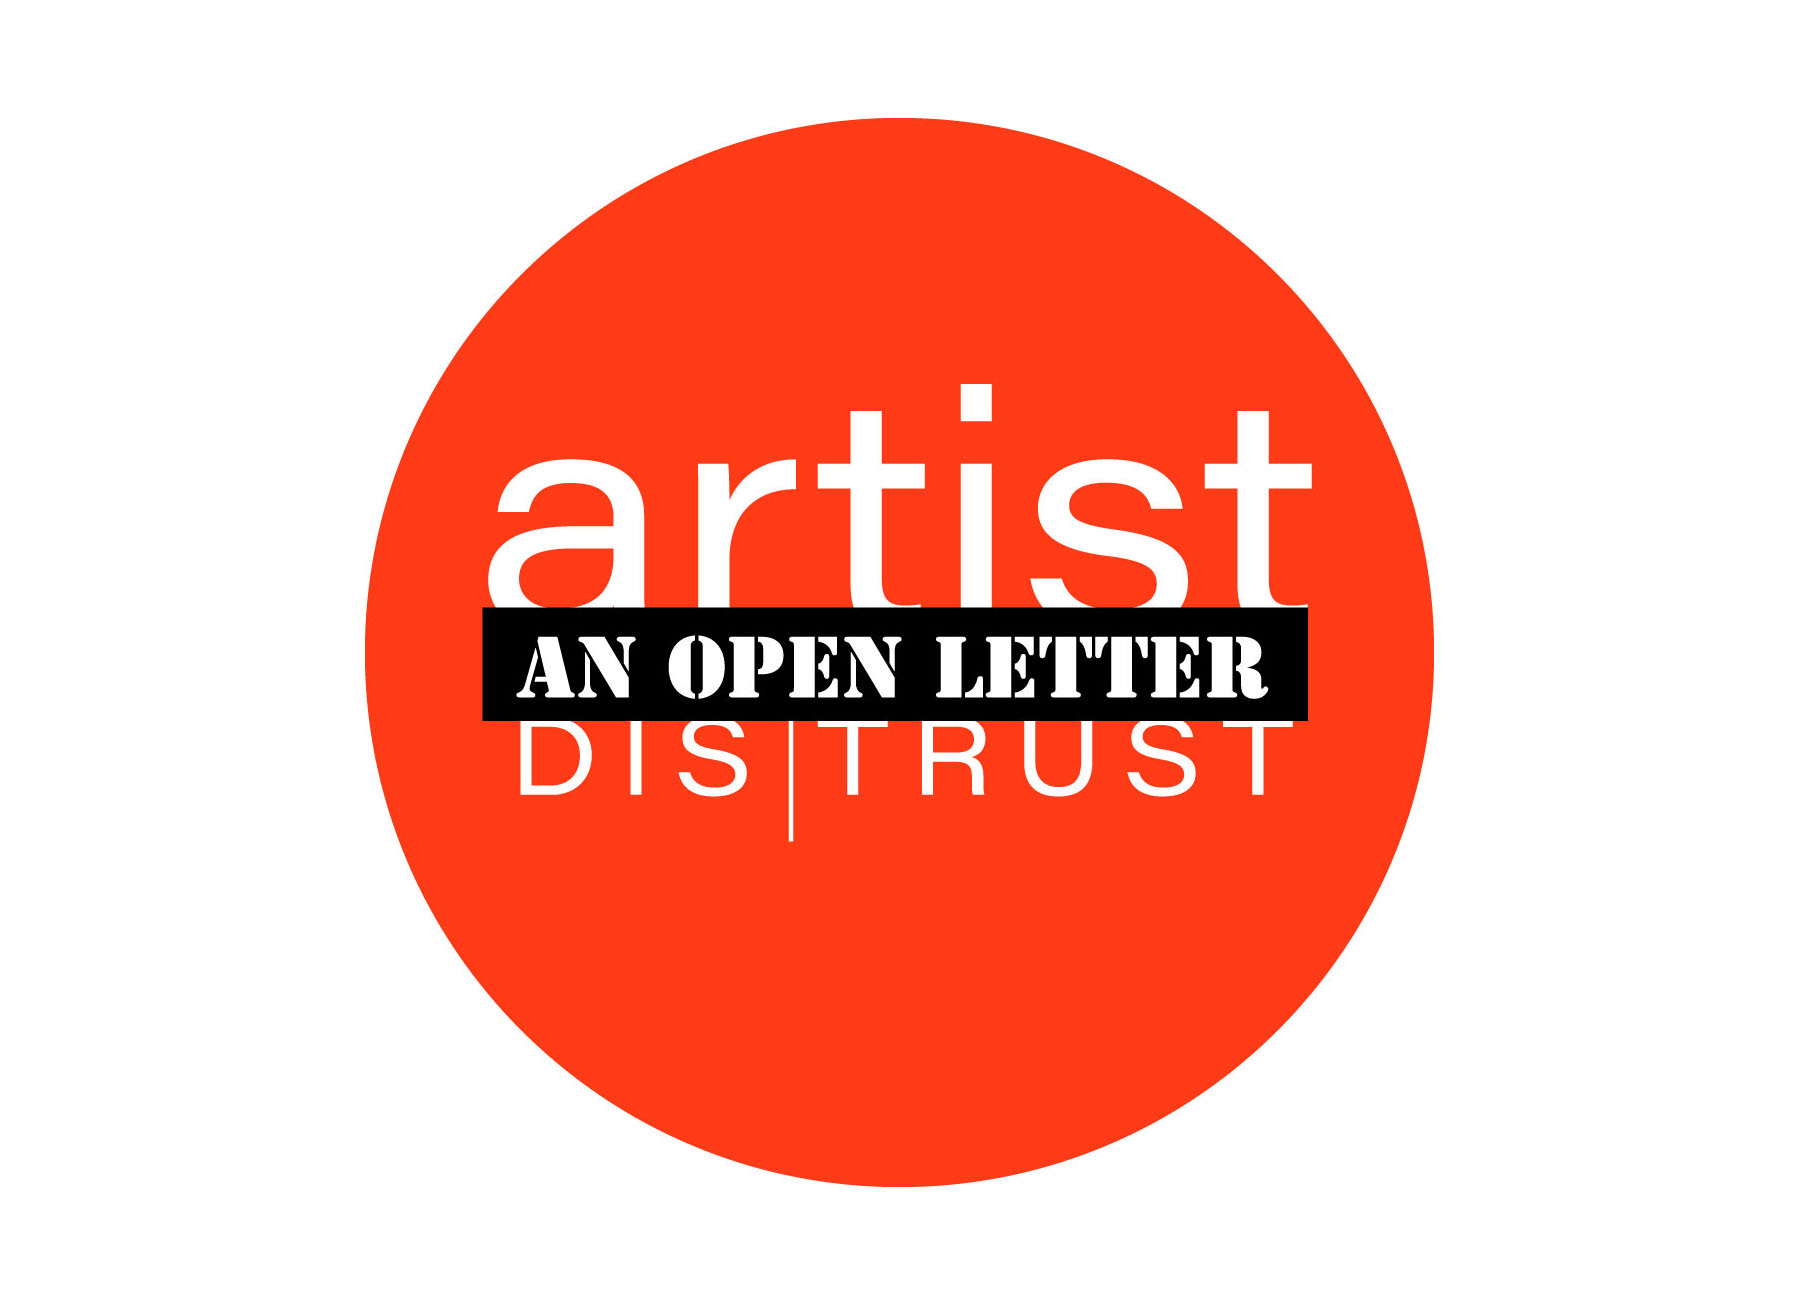 A red circle with white letters and a superimposed black rectangle that reads ‘artist dis | trust’ and ‘an open letter’.